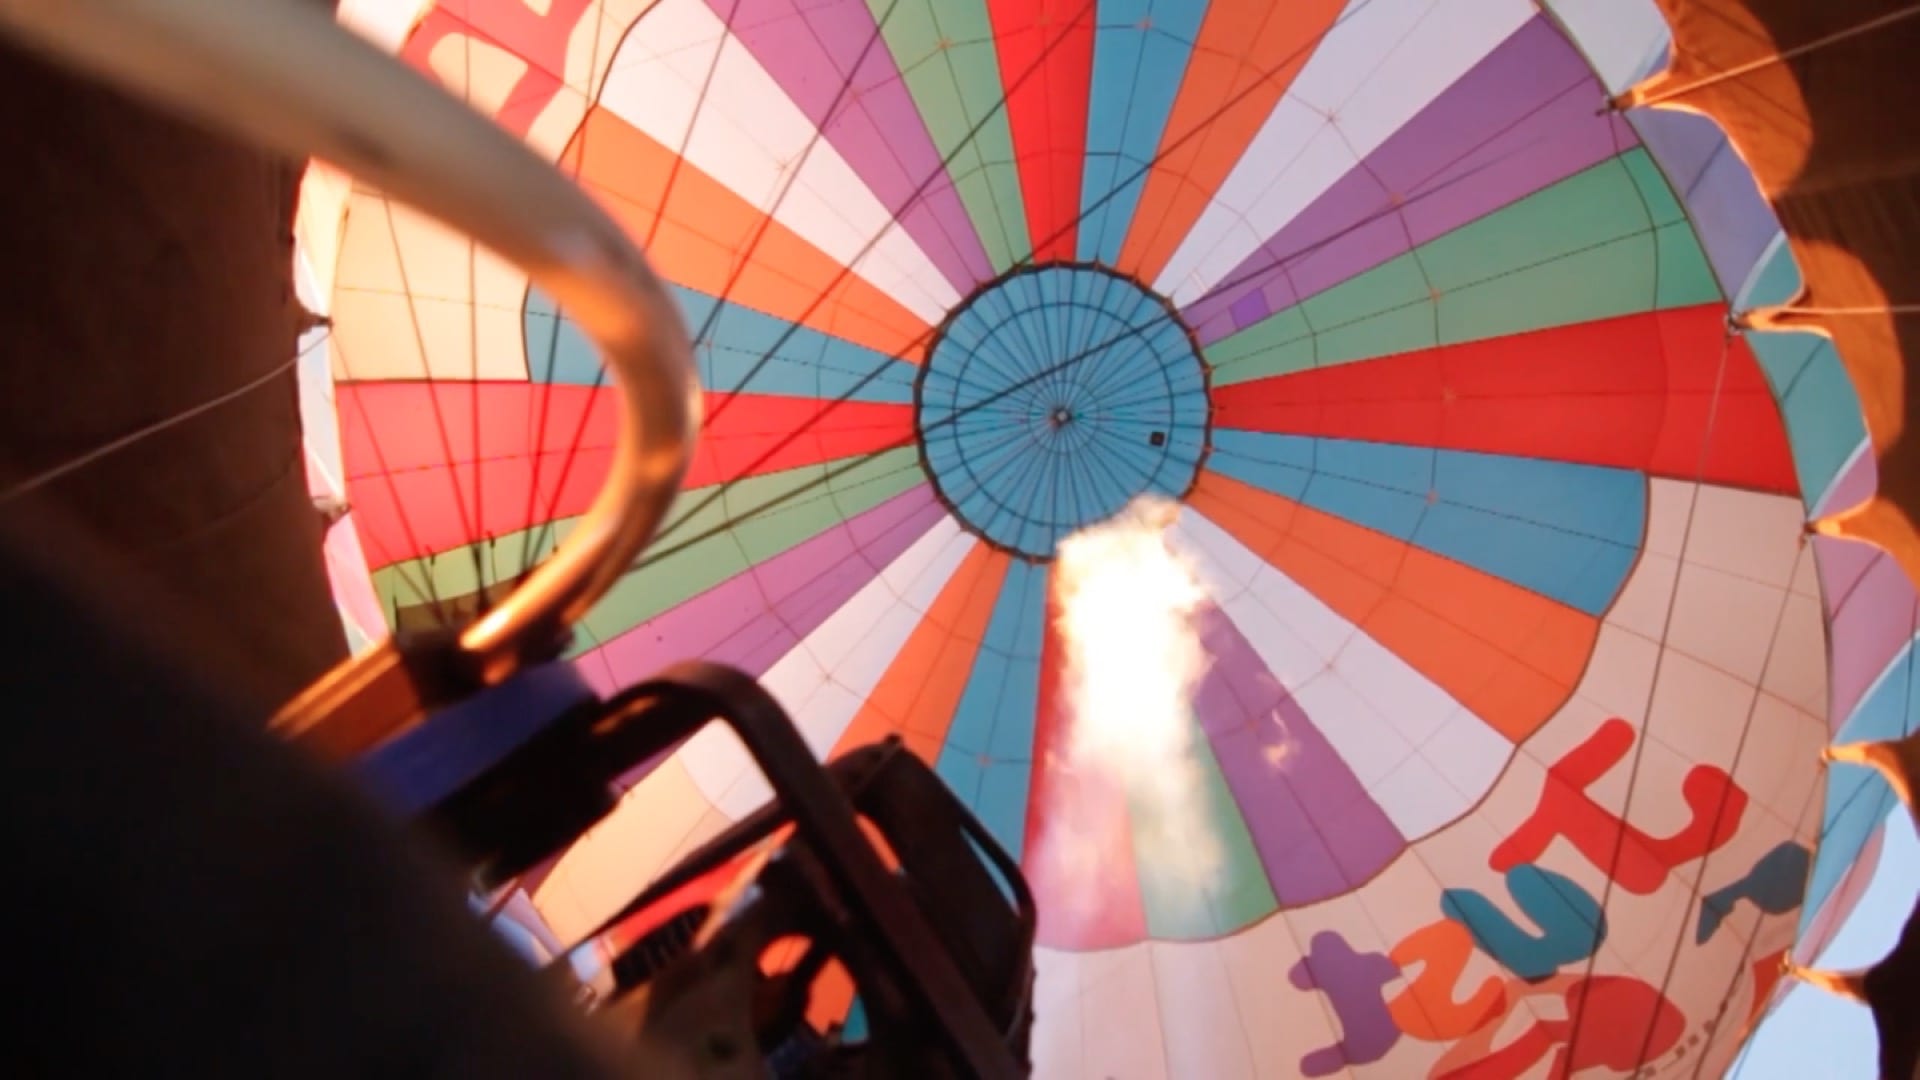 View looking into a multicolored hot air balloon